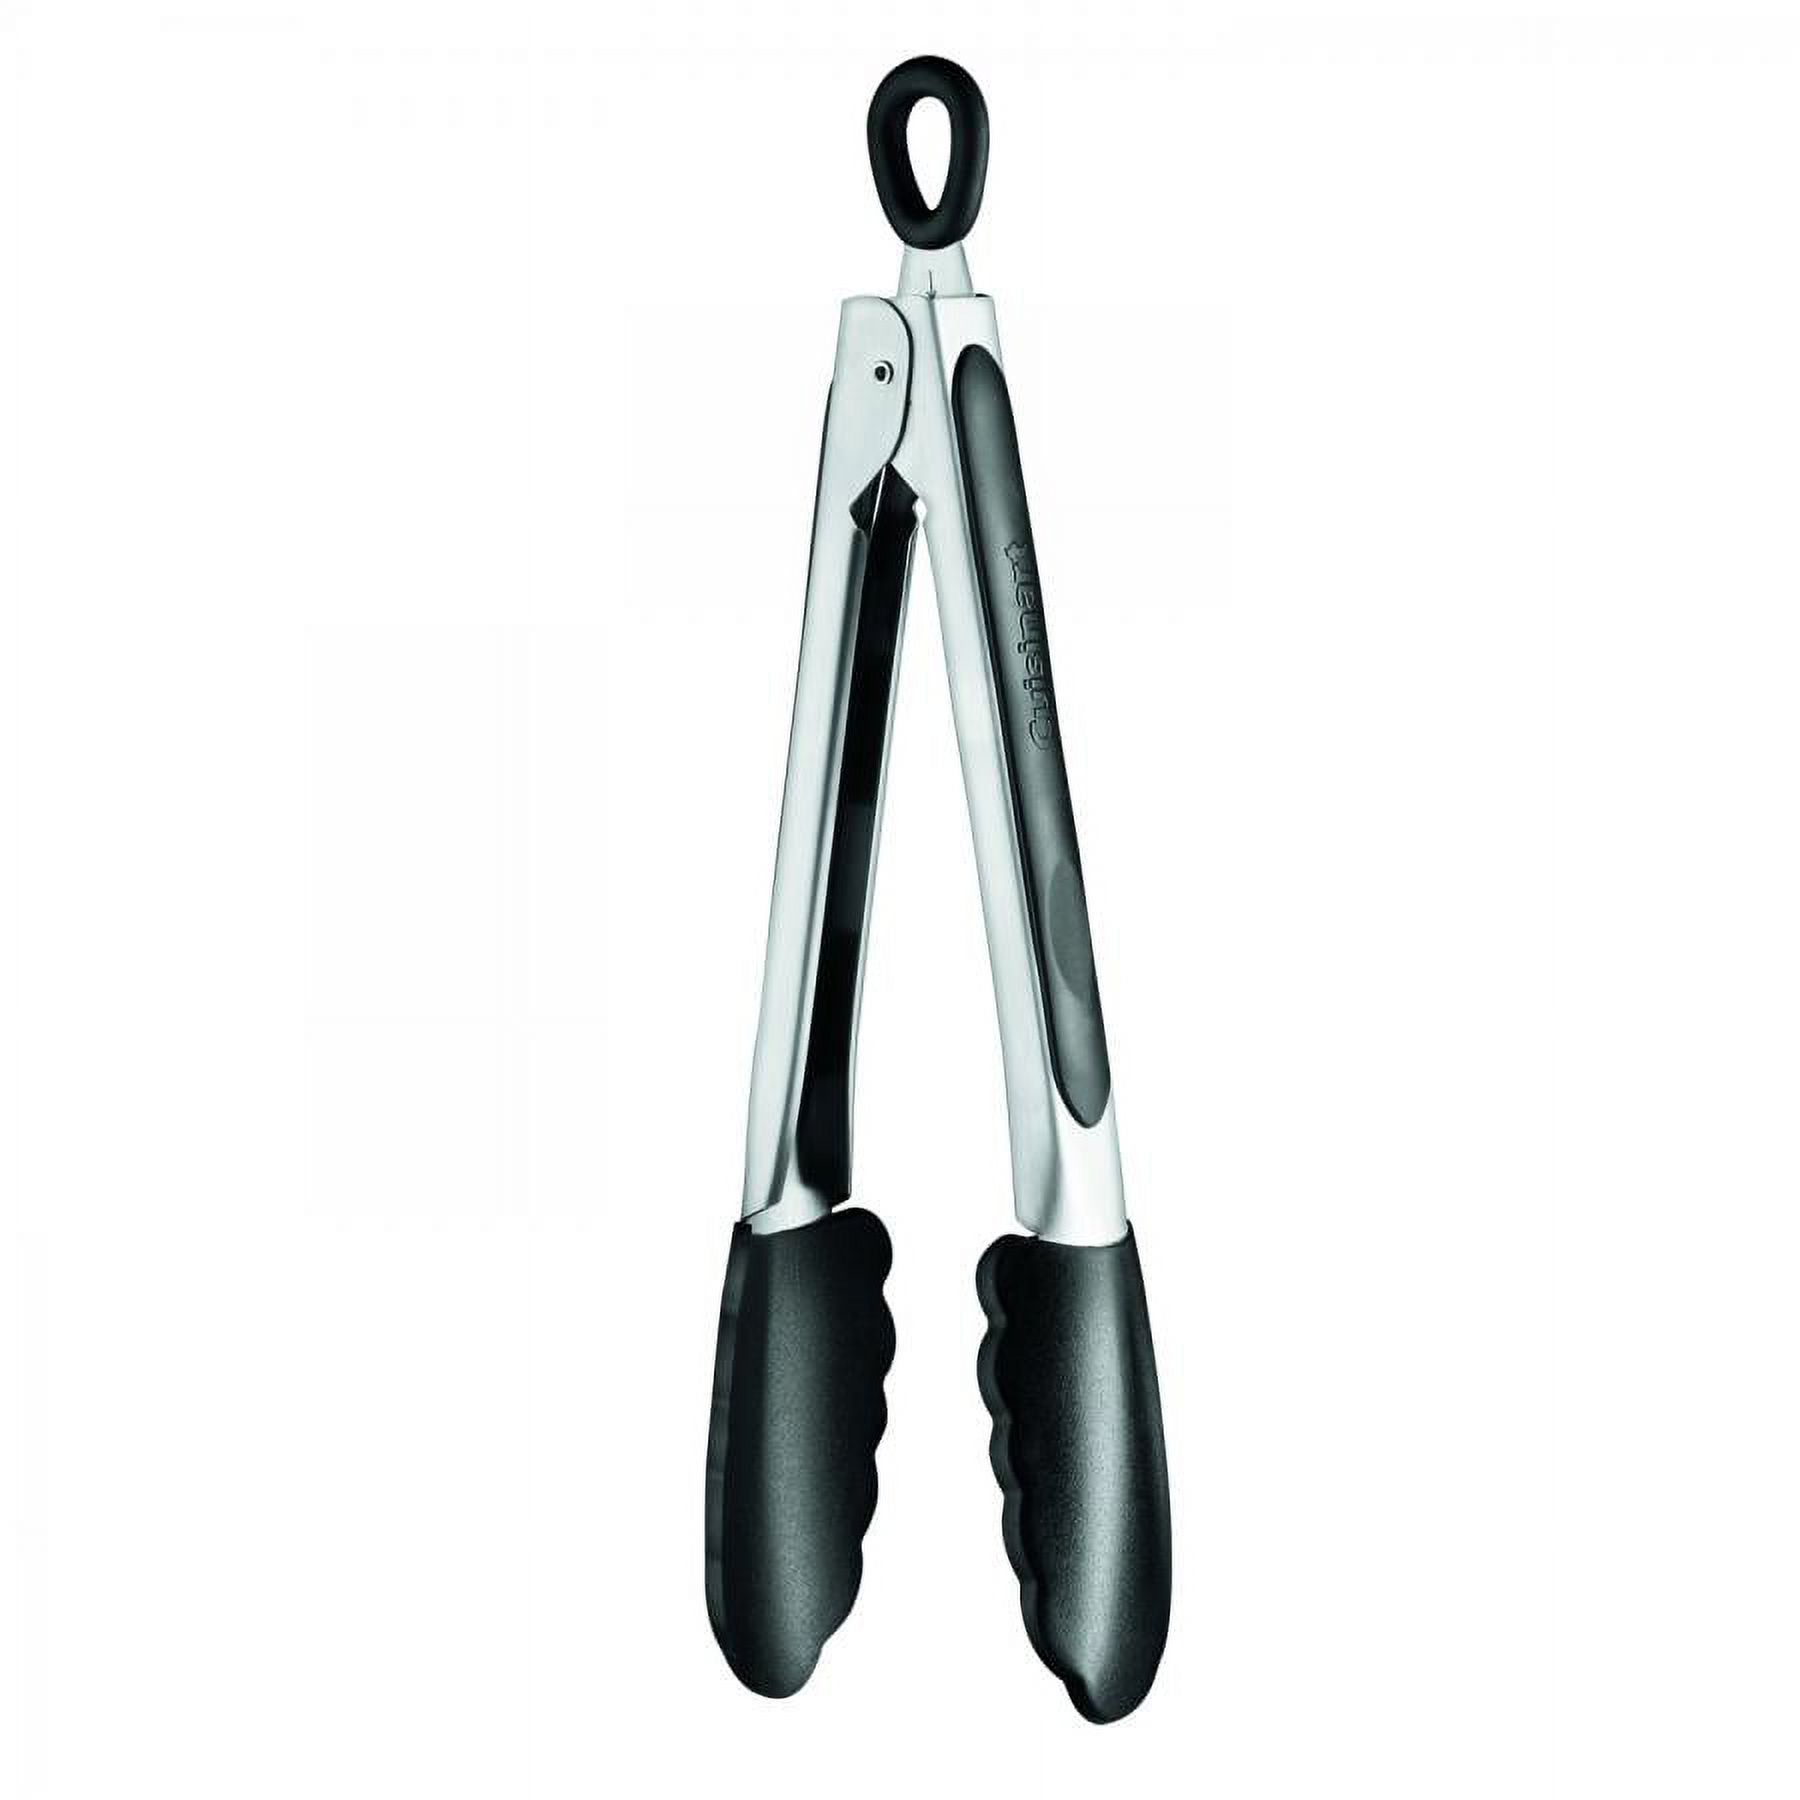 9" Cuisinart Stainless Steel Silicone-Tipped Kitchen Tongs (Black) $5.09